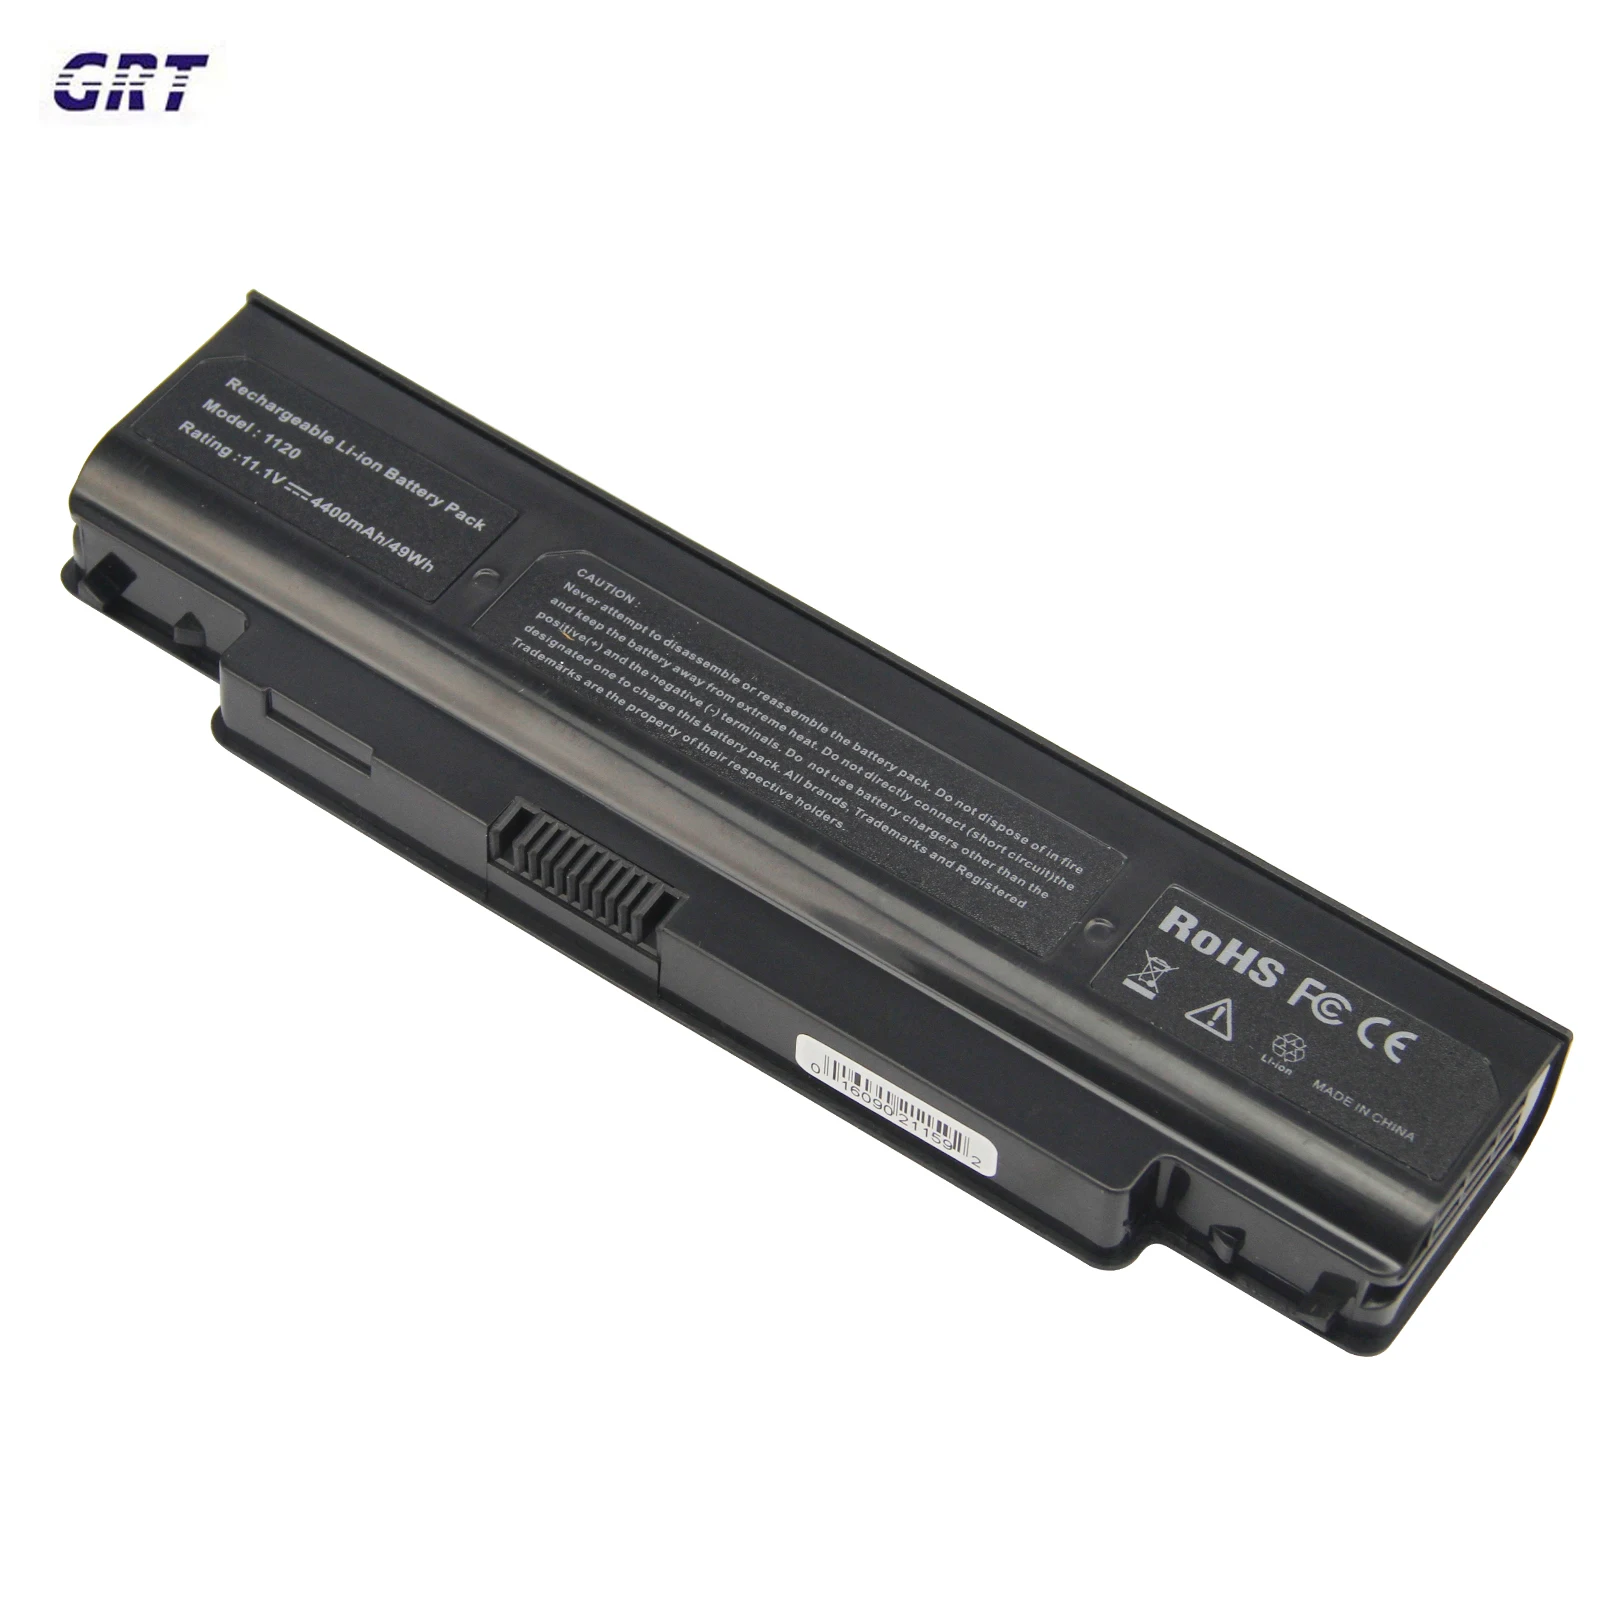 Slepen Microbe laat staan Wholesale Laptop Battery For Dell Latitude Latitude E7440 E7450 Laptop  5k1gw G95j5 - Buy 6cells Laptop Battery For Dell E7440,Rechargeable Battery  For Dell E7440,Laptop Battery For Dell E7440 Product on Alibaba.com